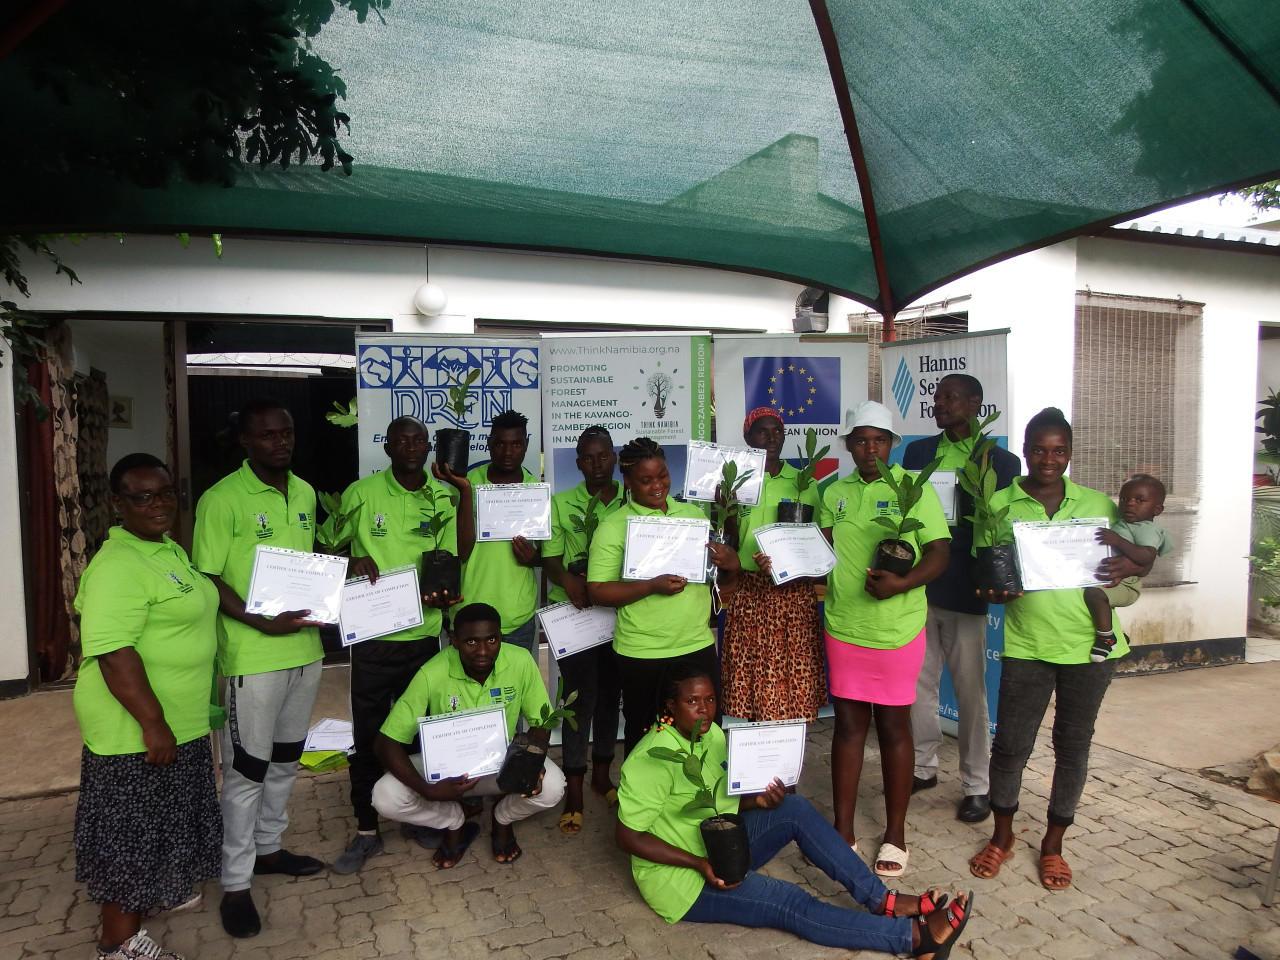 12 Multipliers from Kavango East Region trained on Sustainable Forest Management